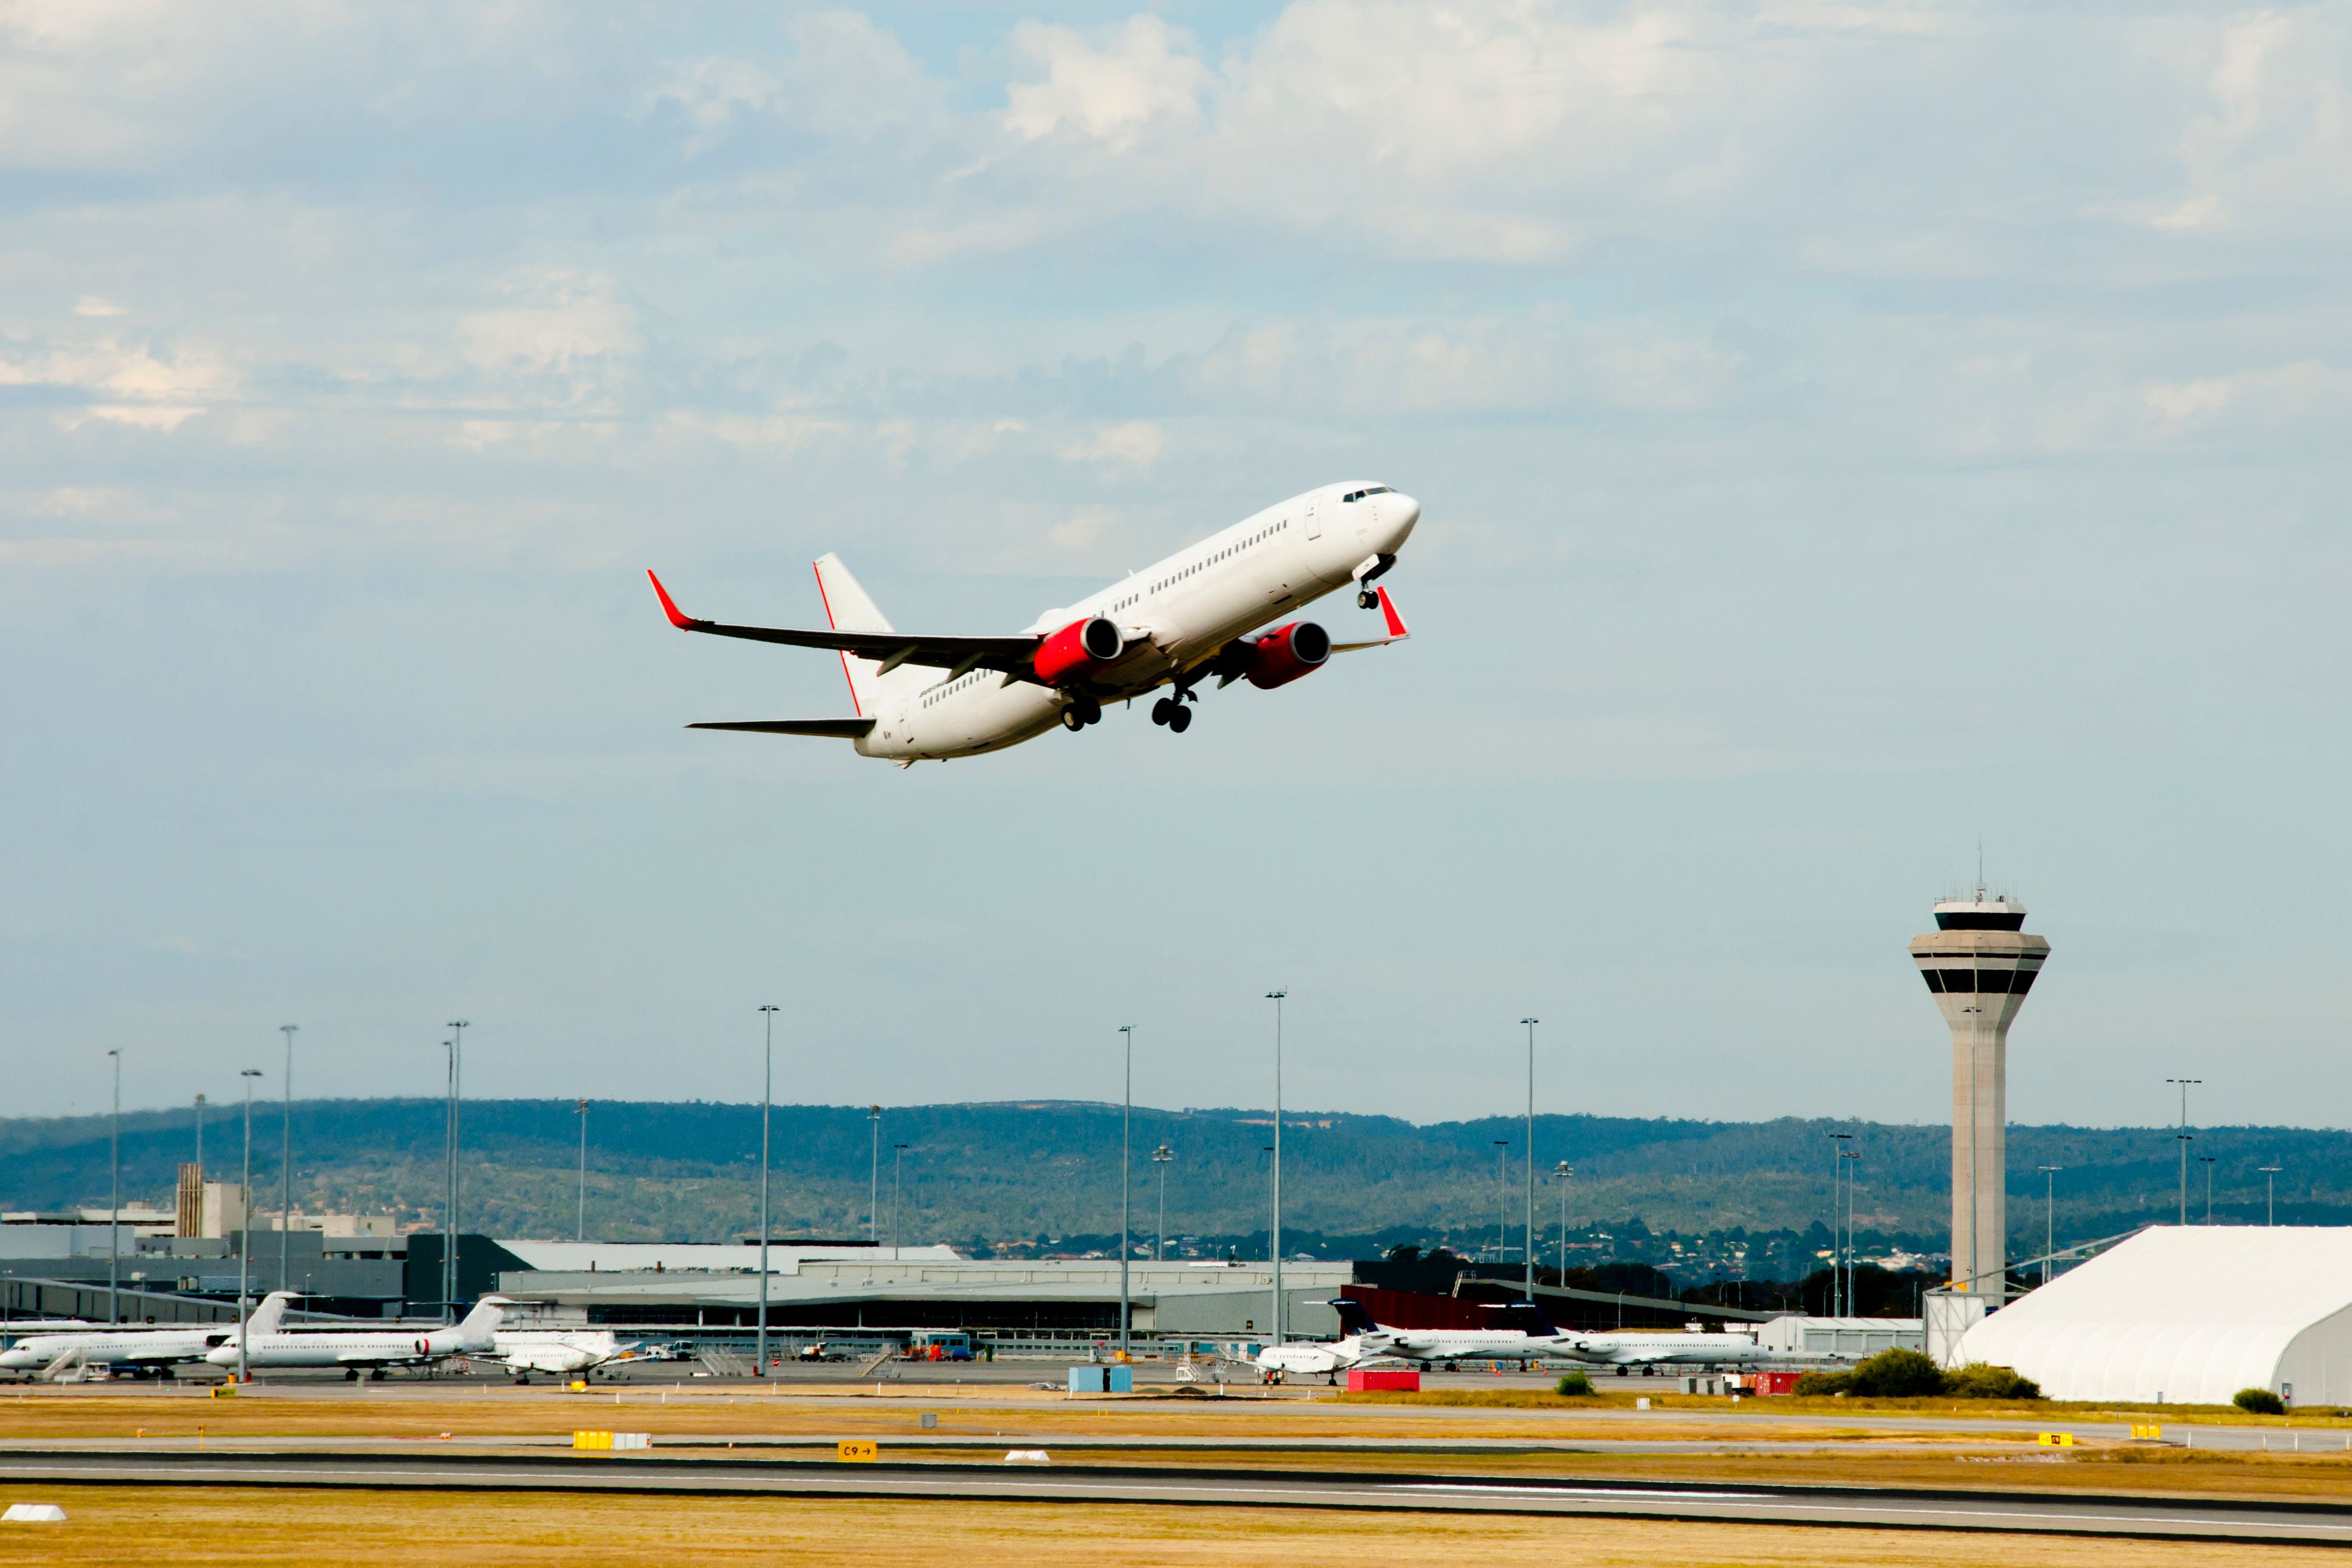 Airplane Taking off by ATC Tower at Perth Airport